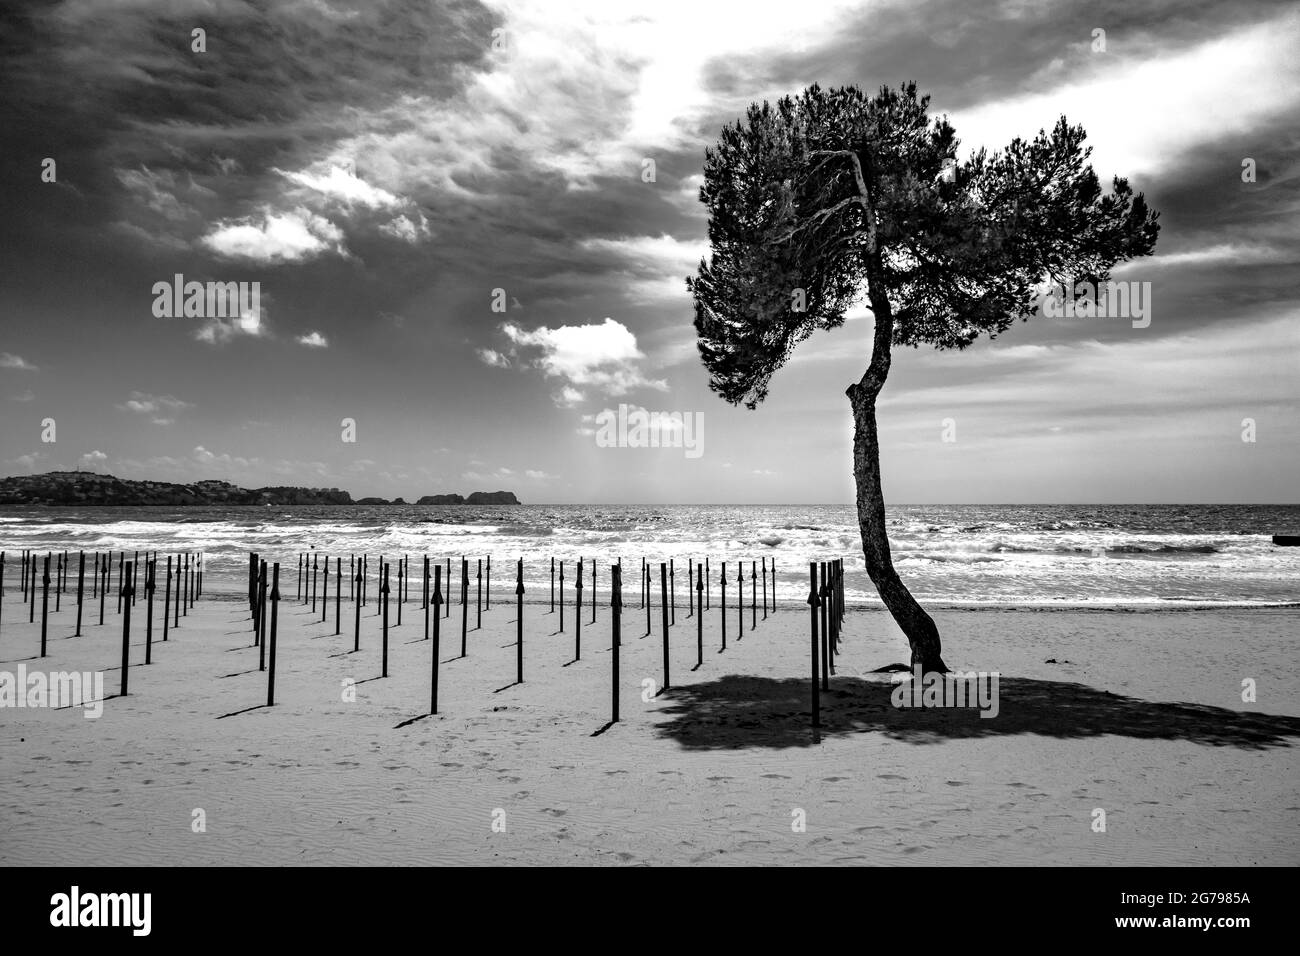 Tree on the beach and umbrella stand Stock Photo